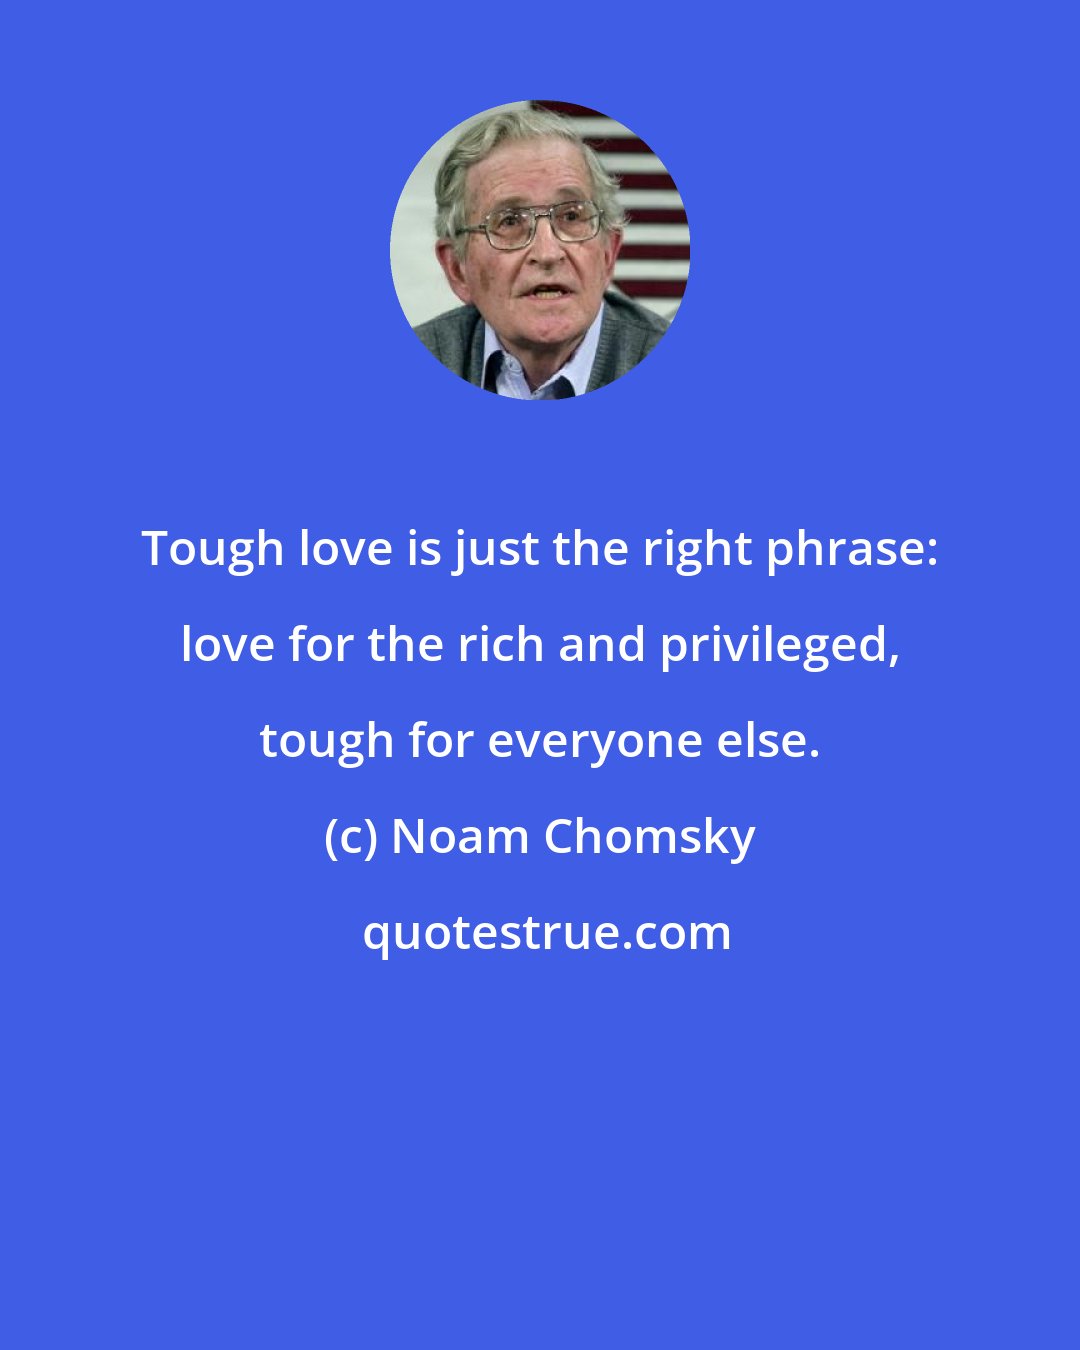 Noam Chomsky: Tough love is just the right phrase: love for the rich and privileged, tough for everyone else.